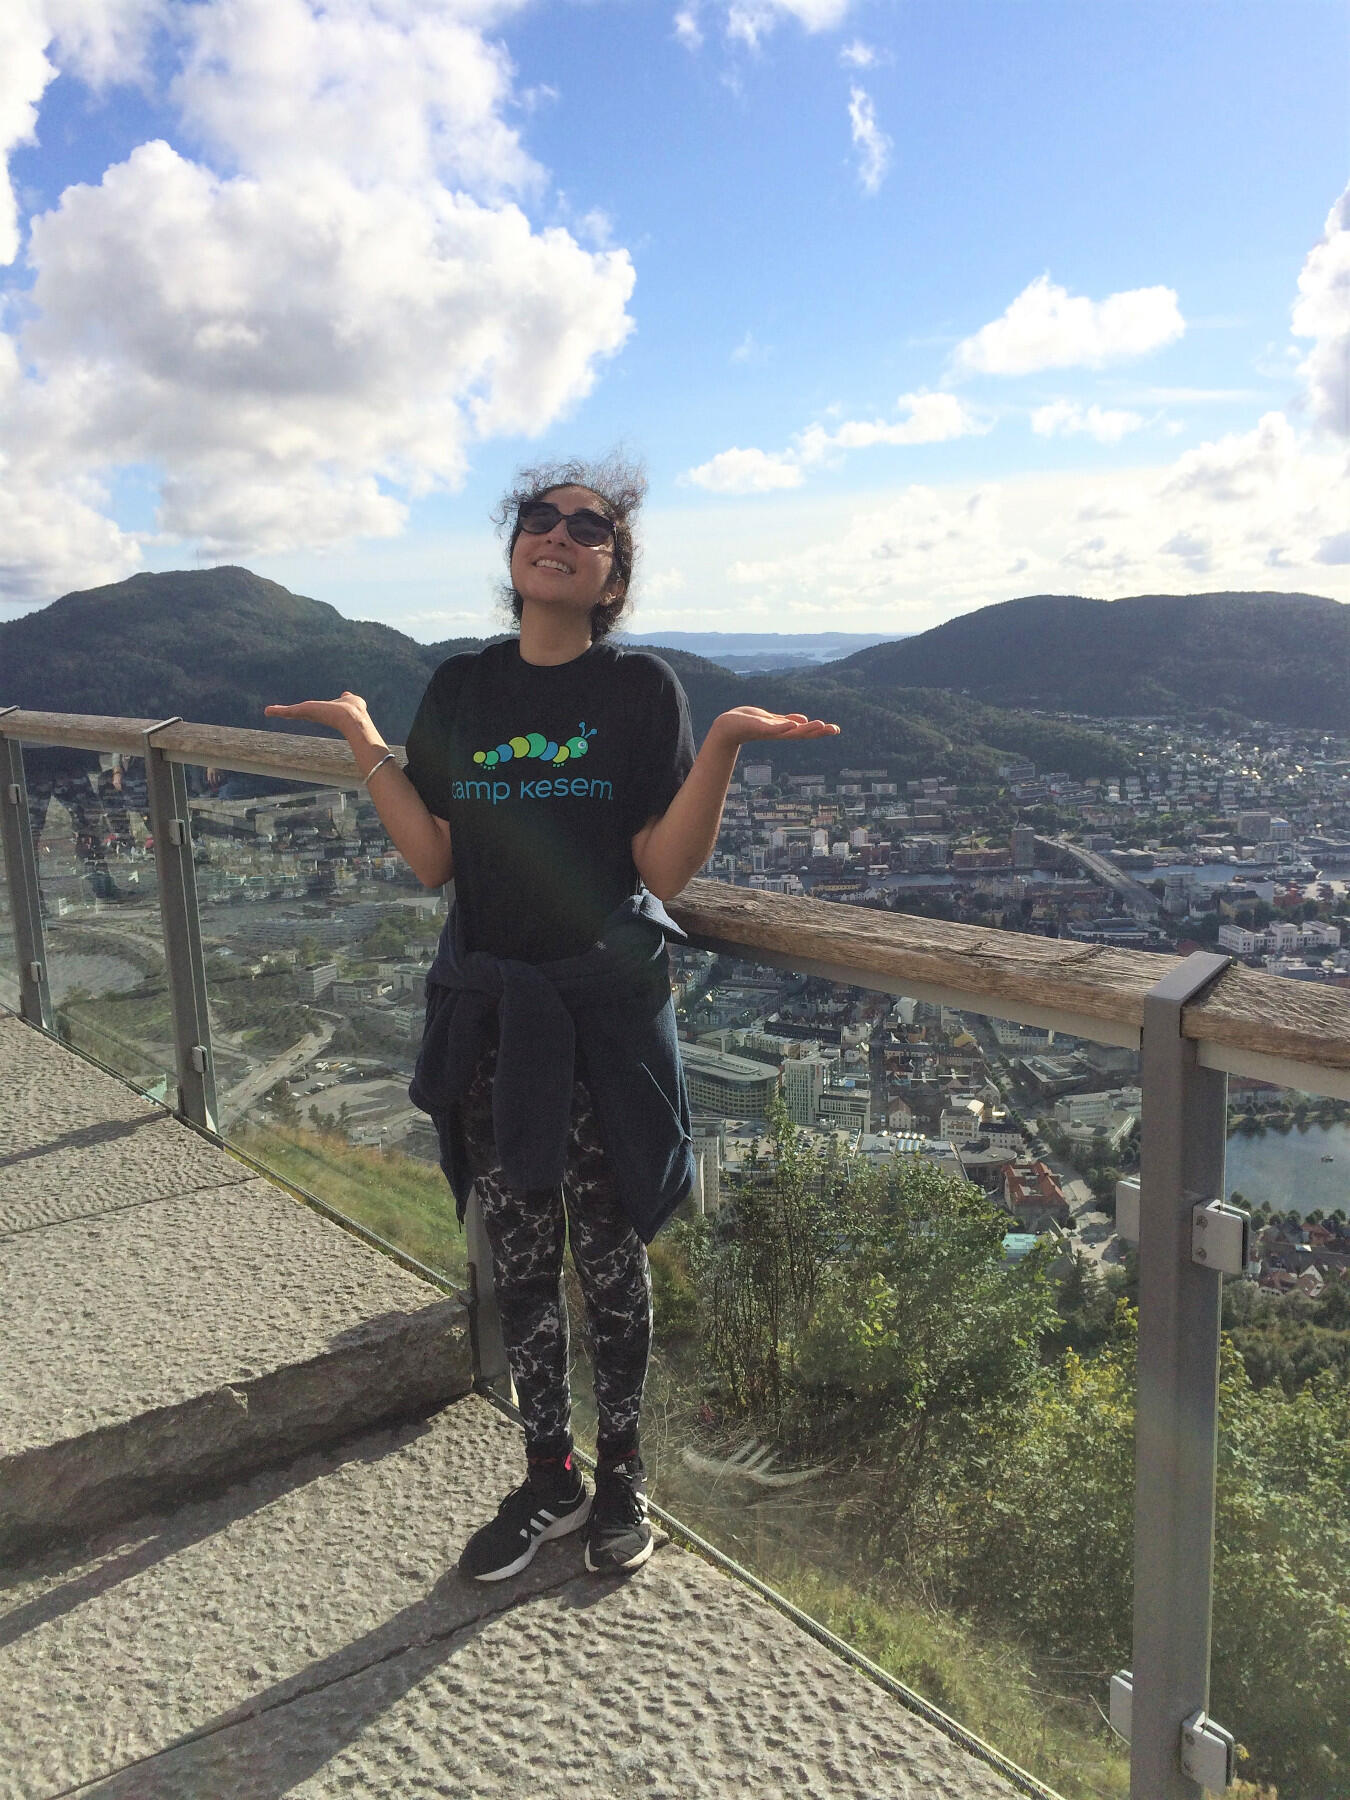 Hanjra, who has been in Norway since August, has enjoyed trying Norwegian food, making friends with the Norwegian people and hiking in the mountains surrounding Bergen. (Courtesy photo)